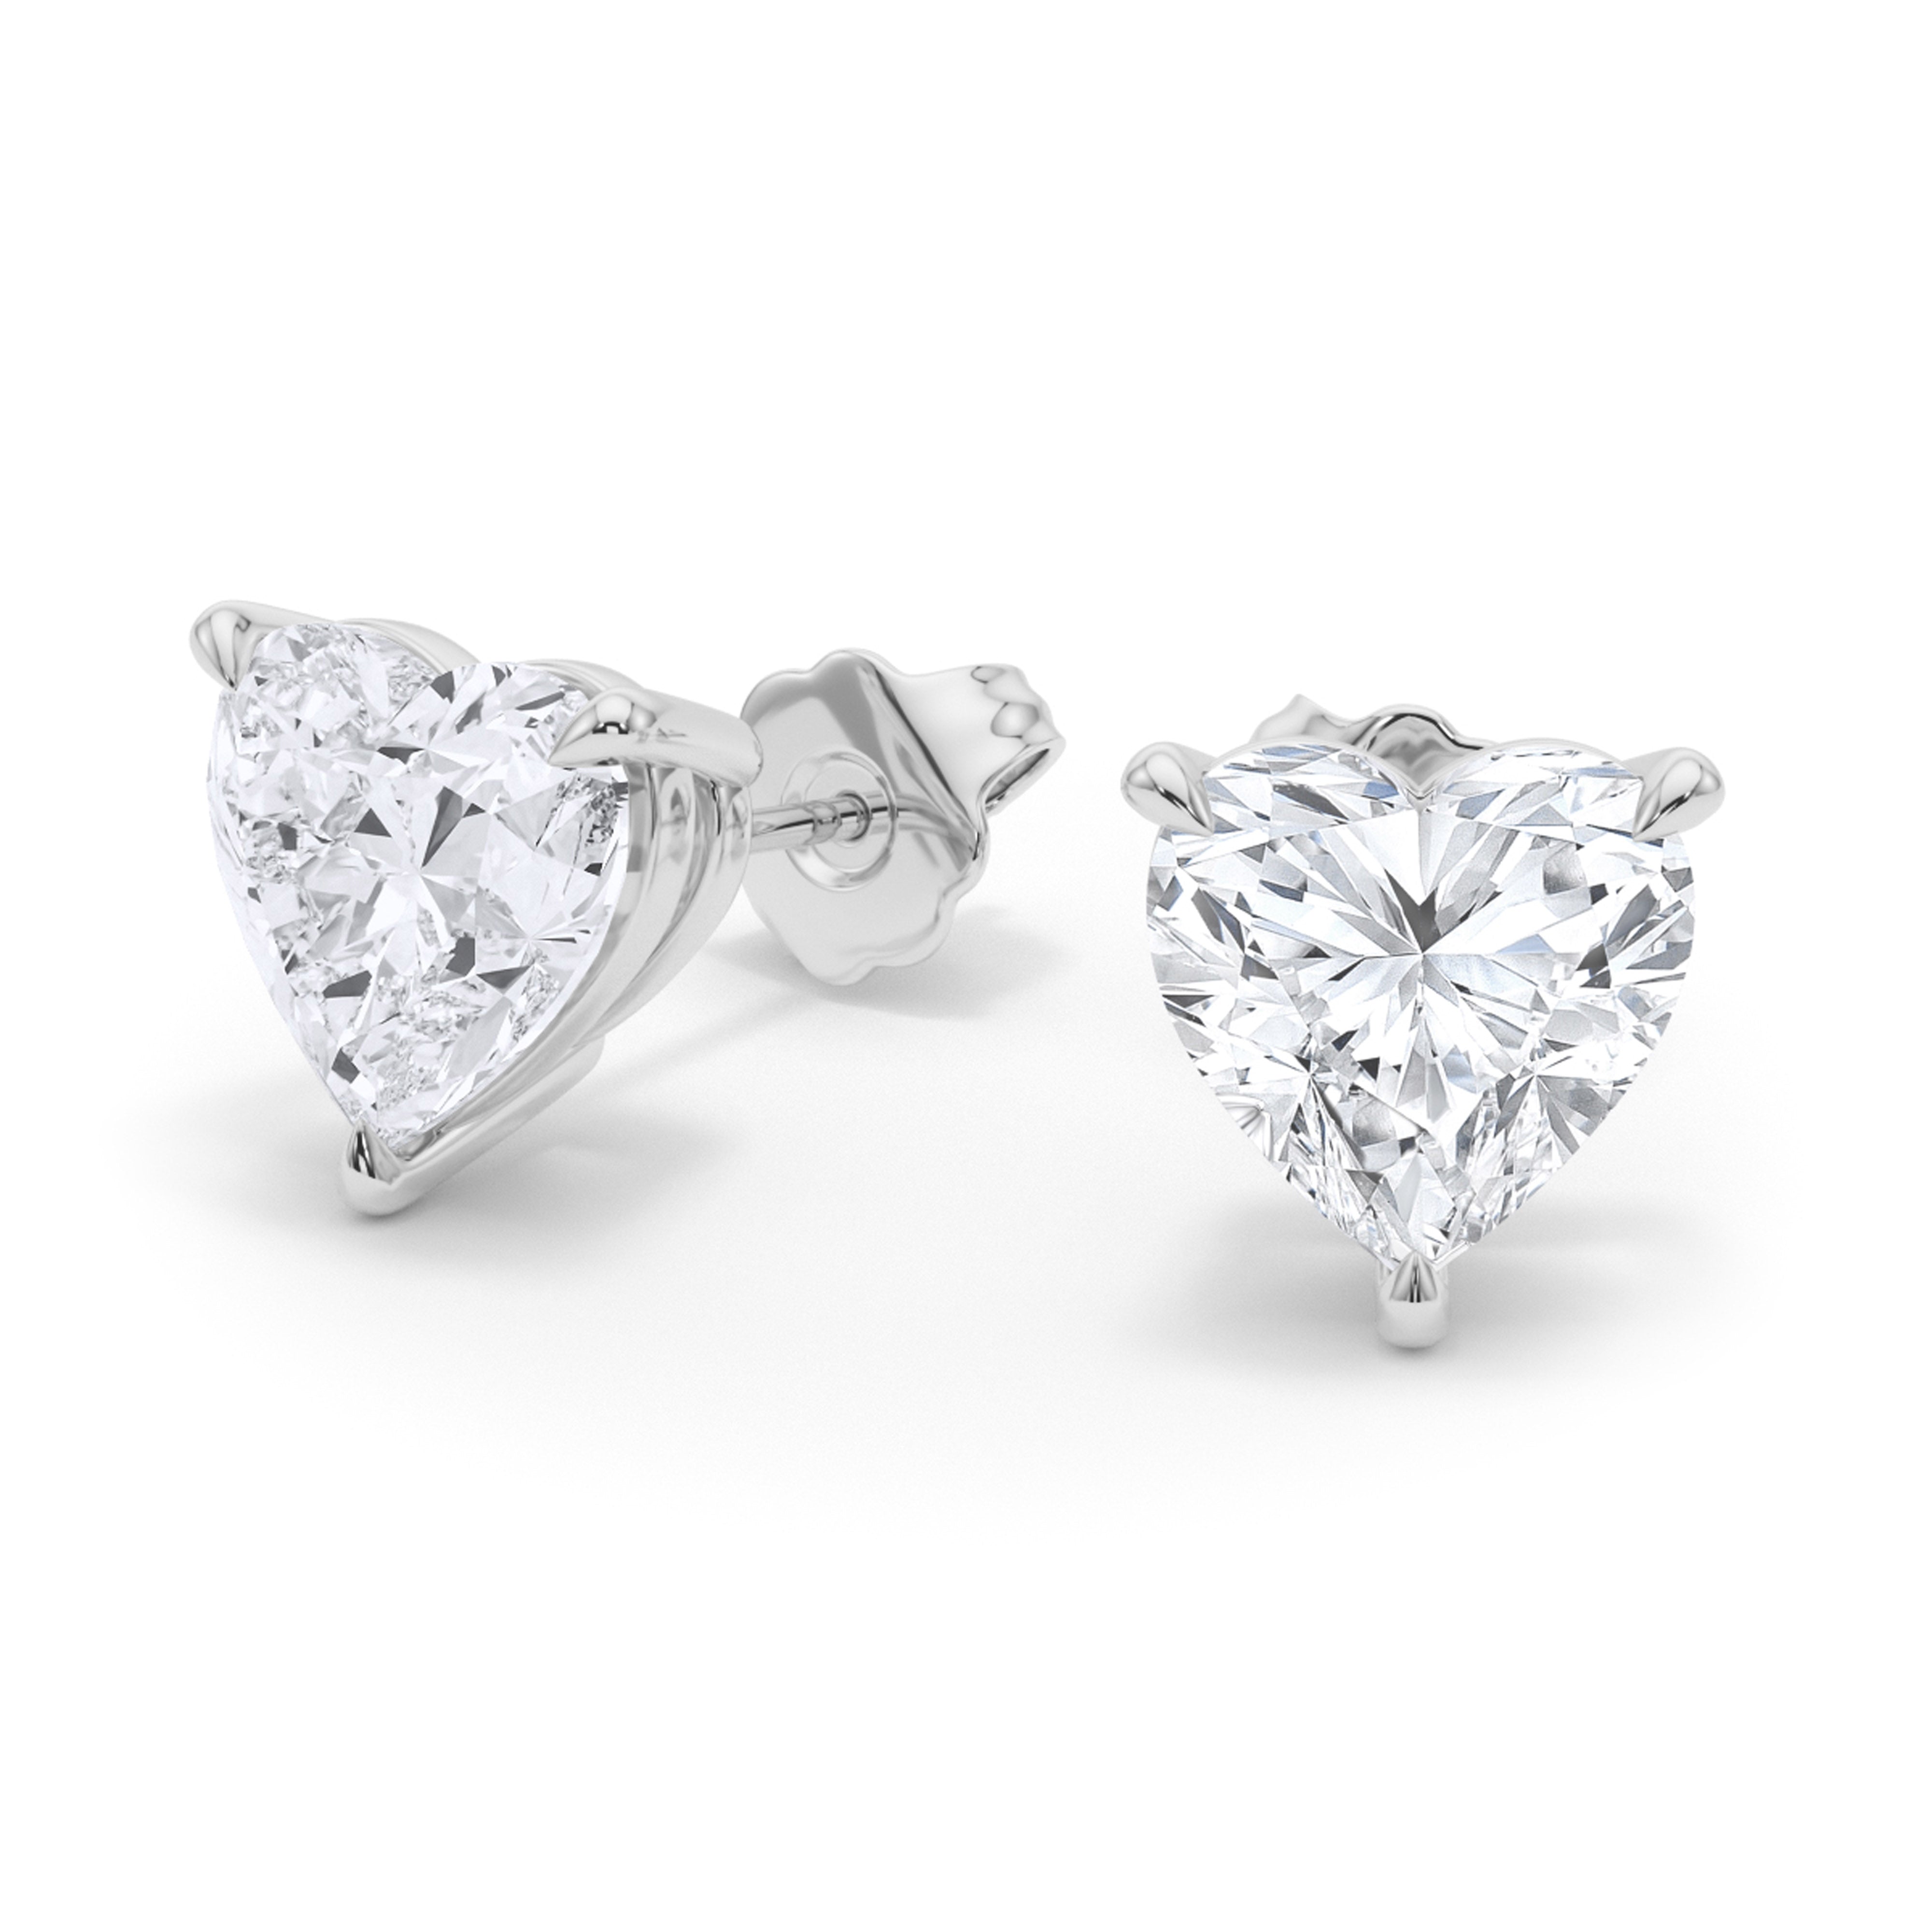 Details 193+ heart shaped solitaire earrings super hot